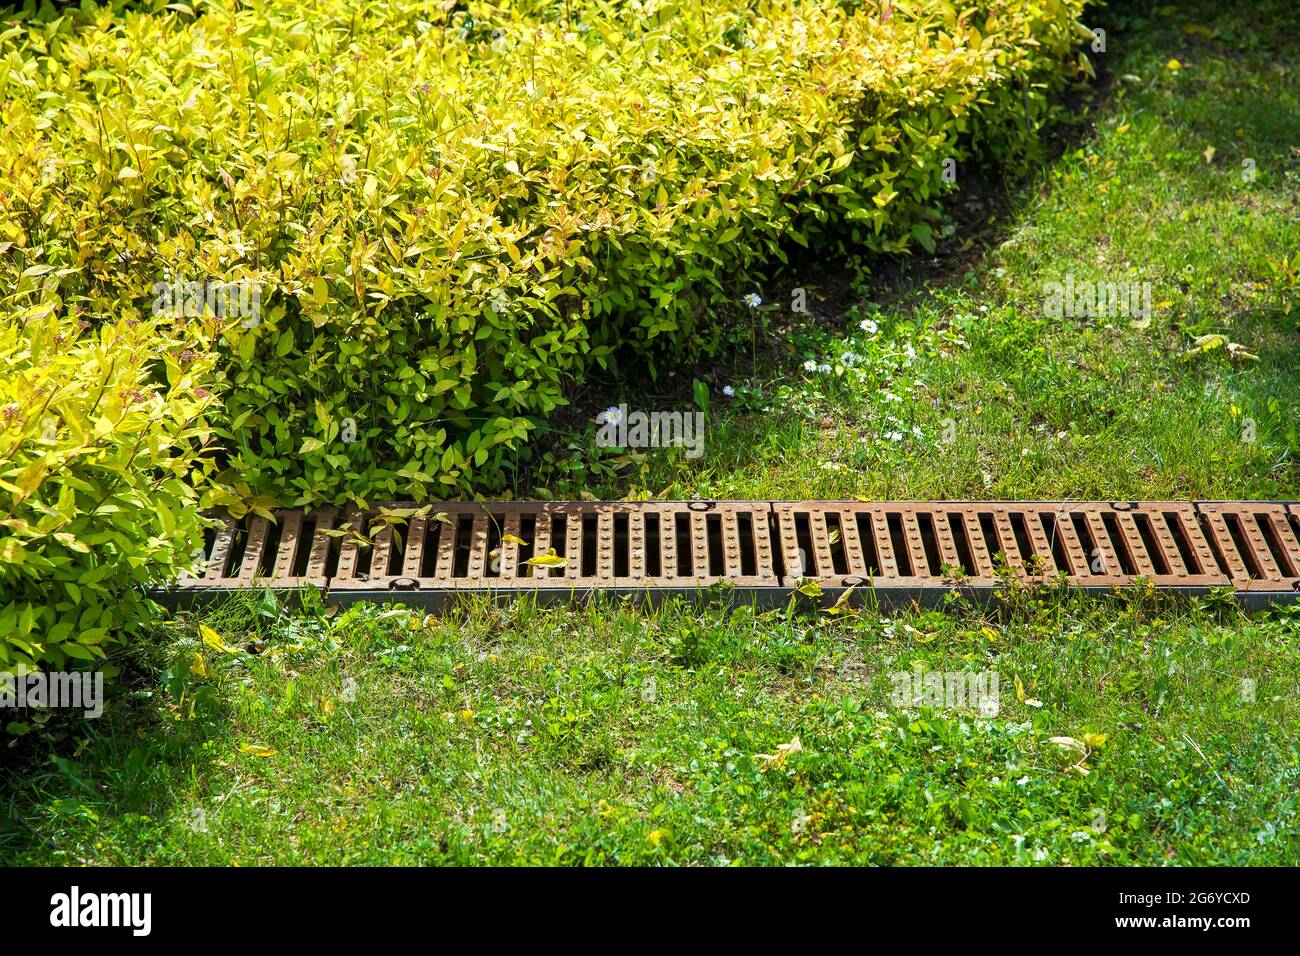 grate drainage system on the lawn with green grass and bushes in the backyard garden, rainwater drainage system in the park among plants lit by sunlig Stock Photo